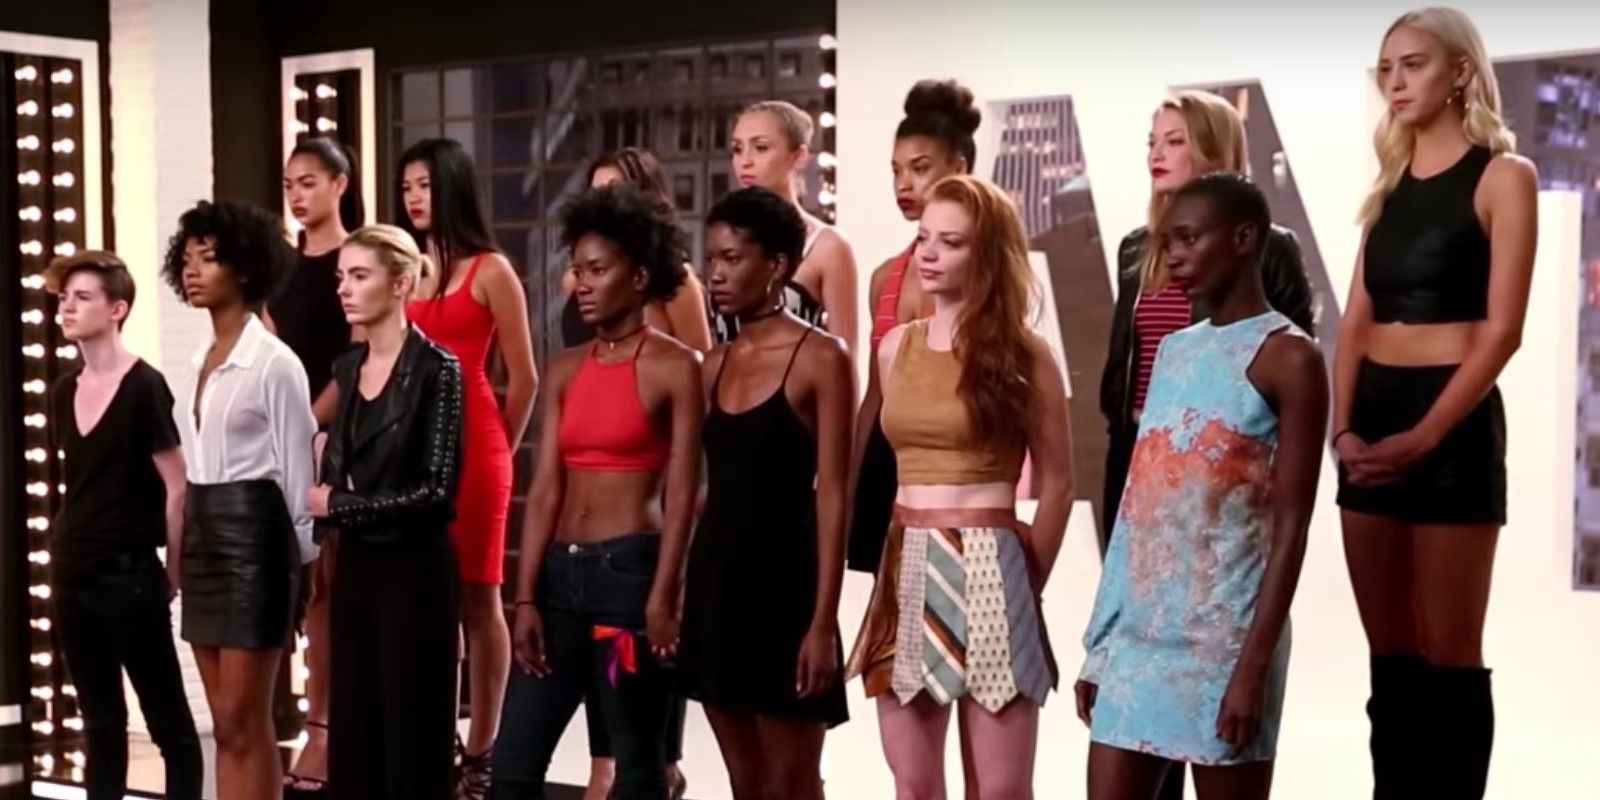 America's Next Top Model: 50 Most Influential Reality TV